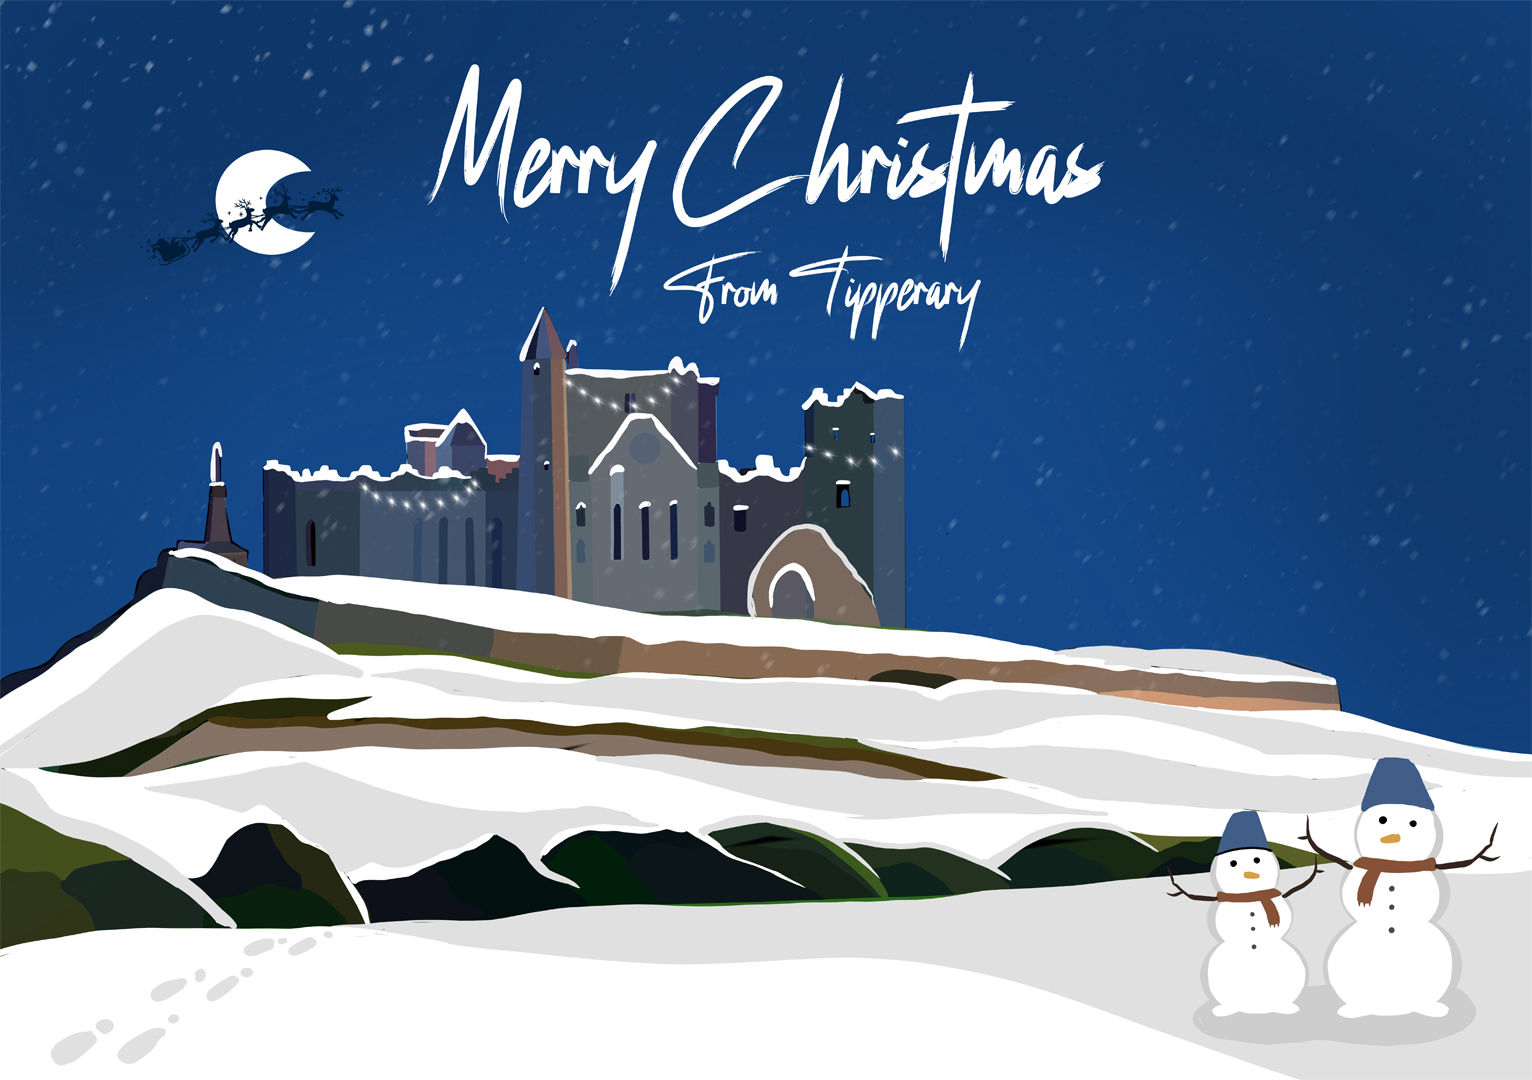 Merry Christmas From Tipperary Greetings Card